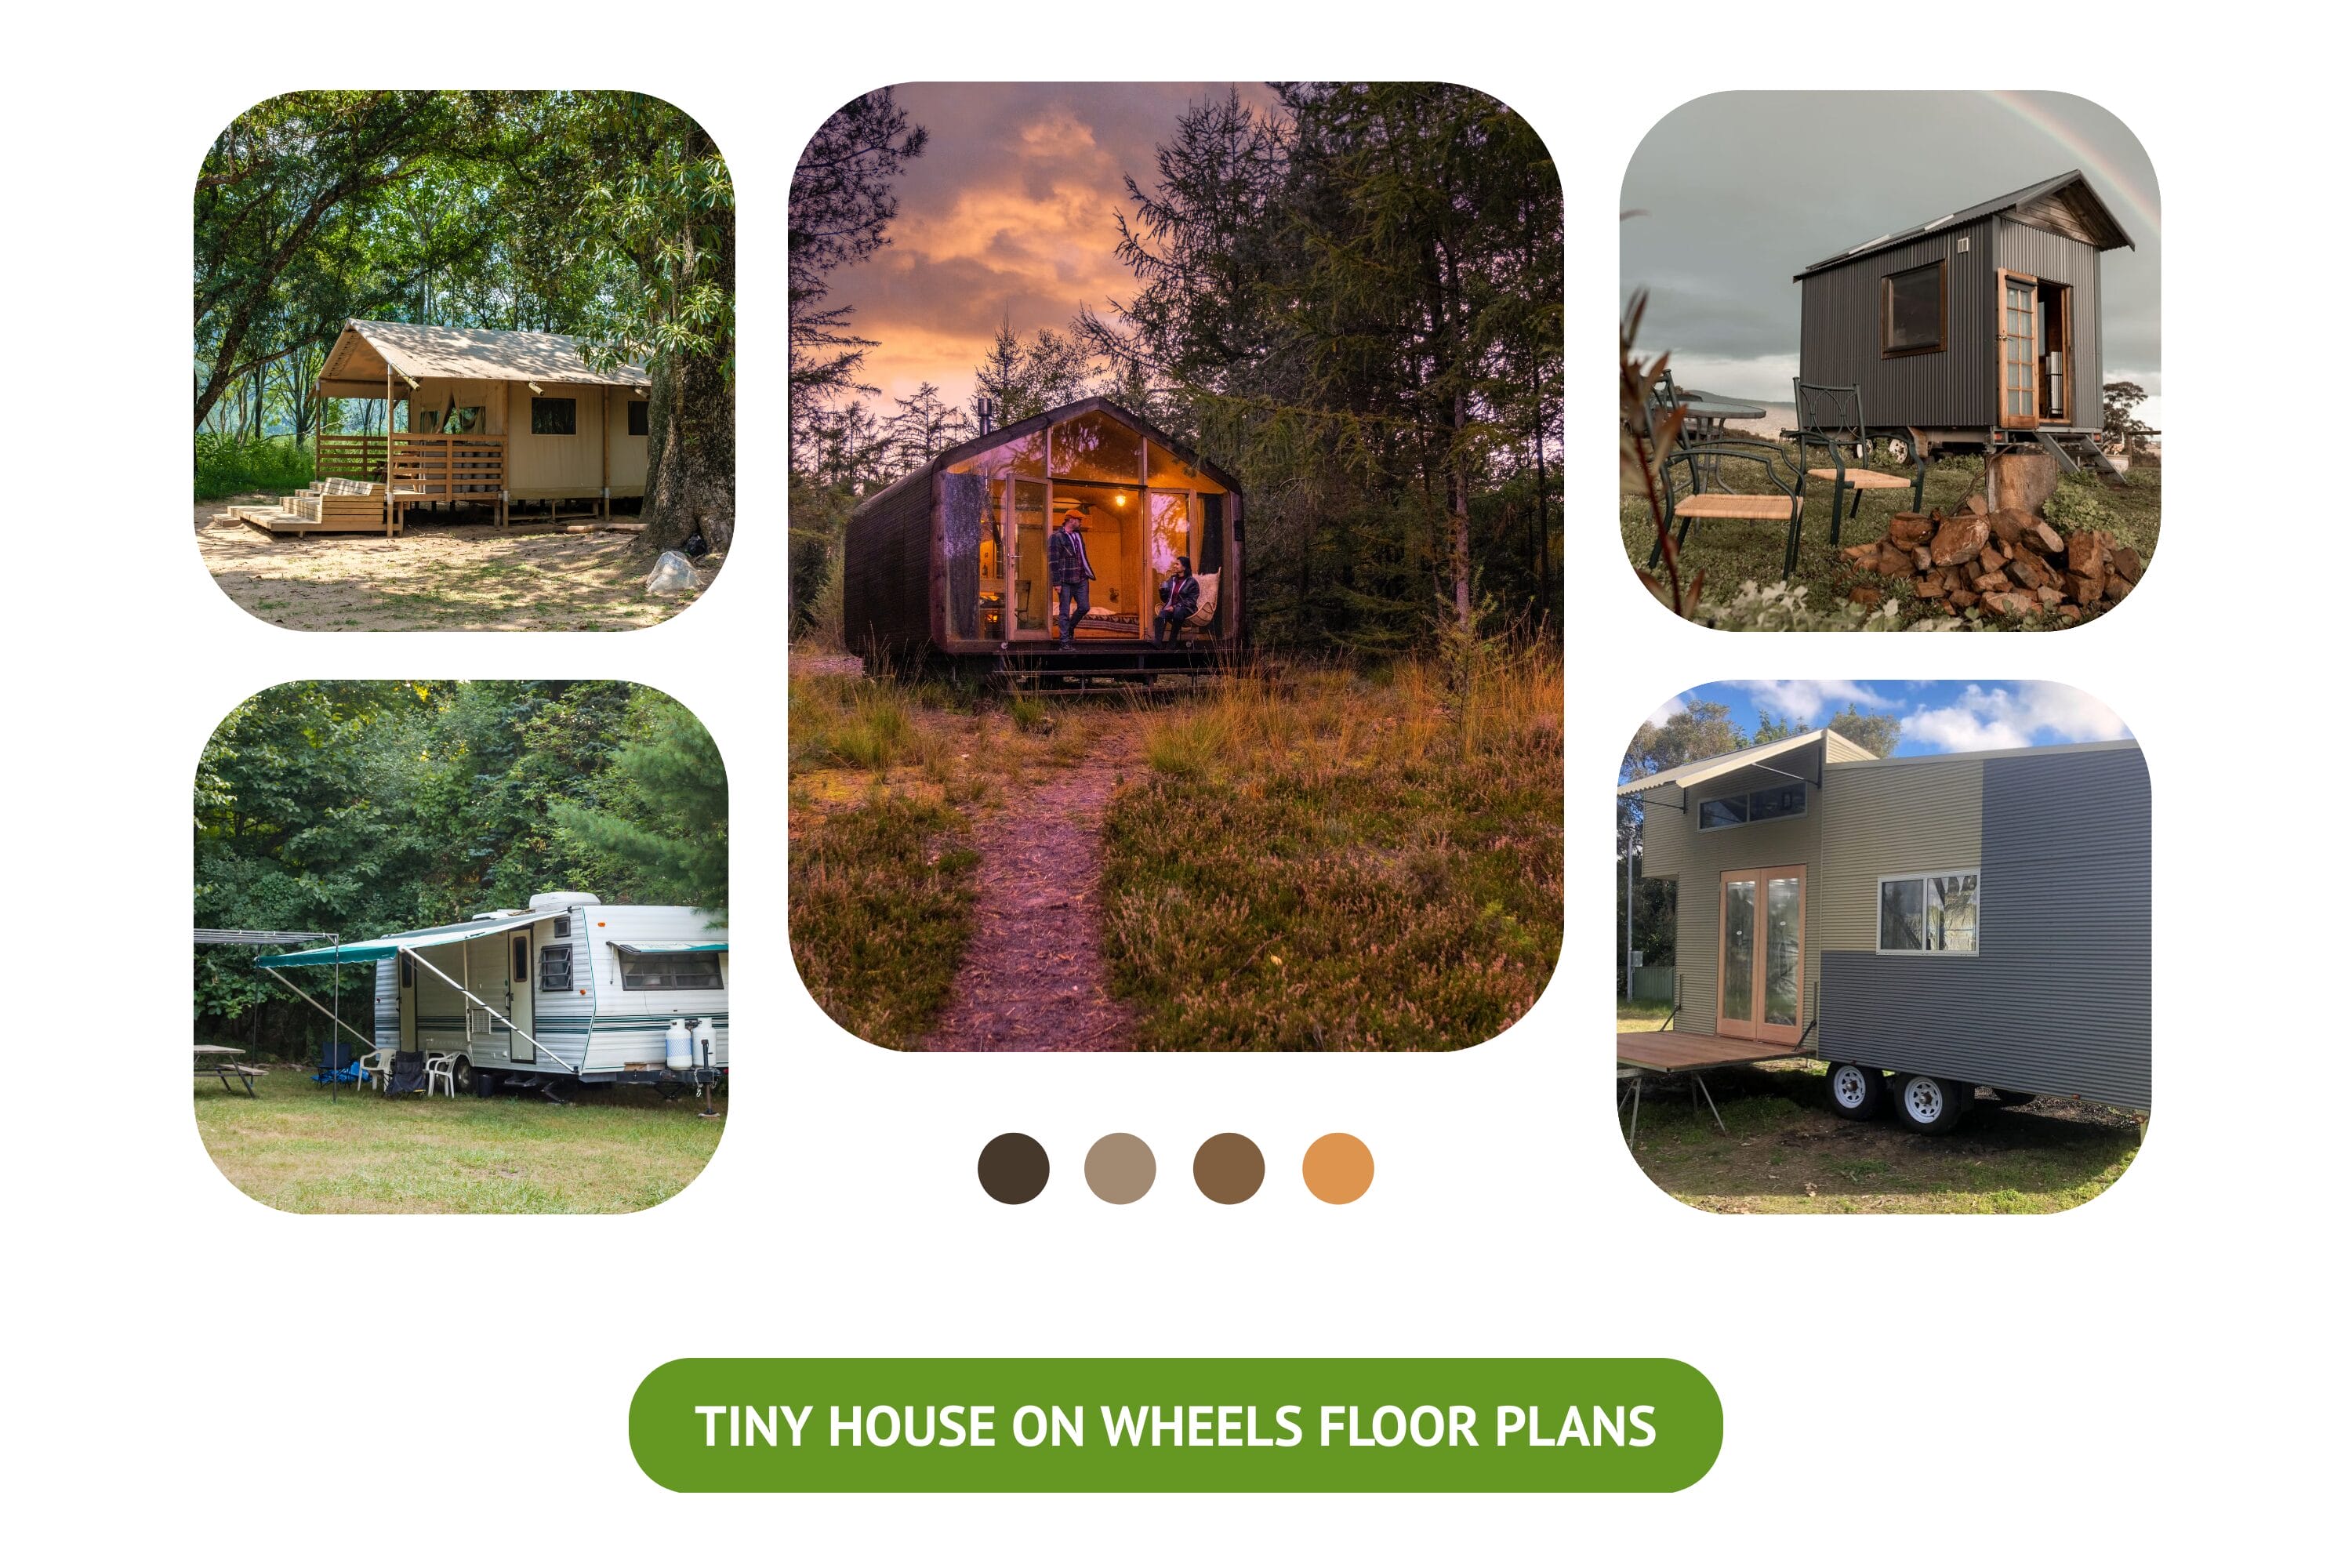 Floor Plans for Tiny Houses on Wheels